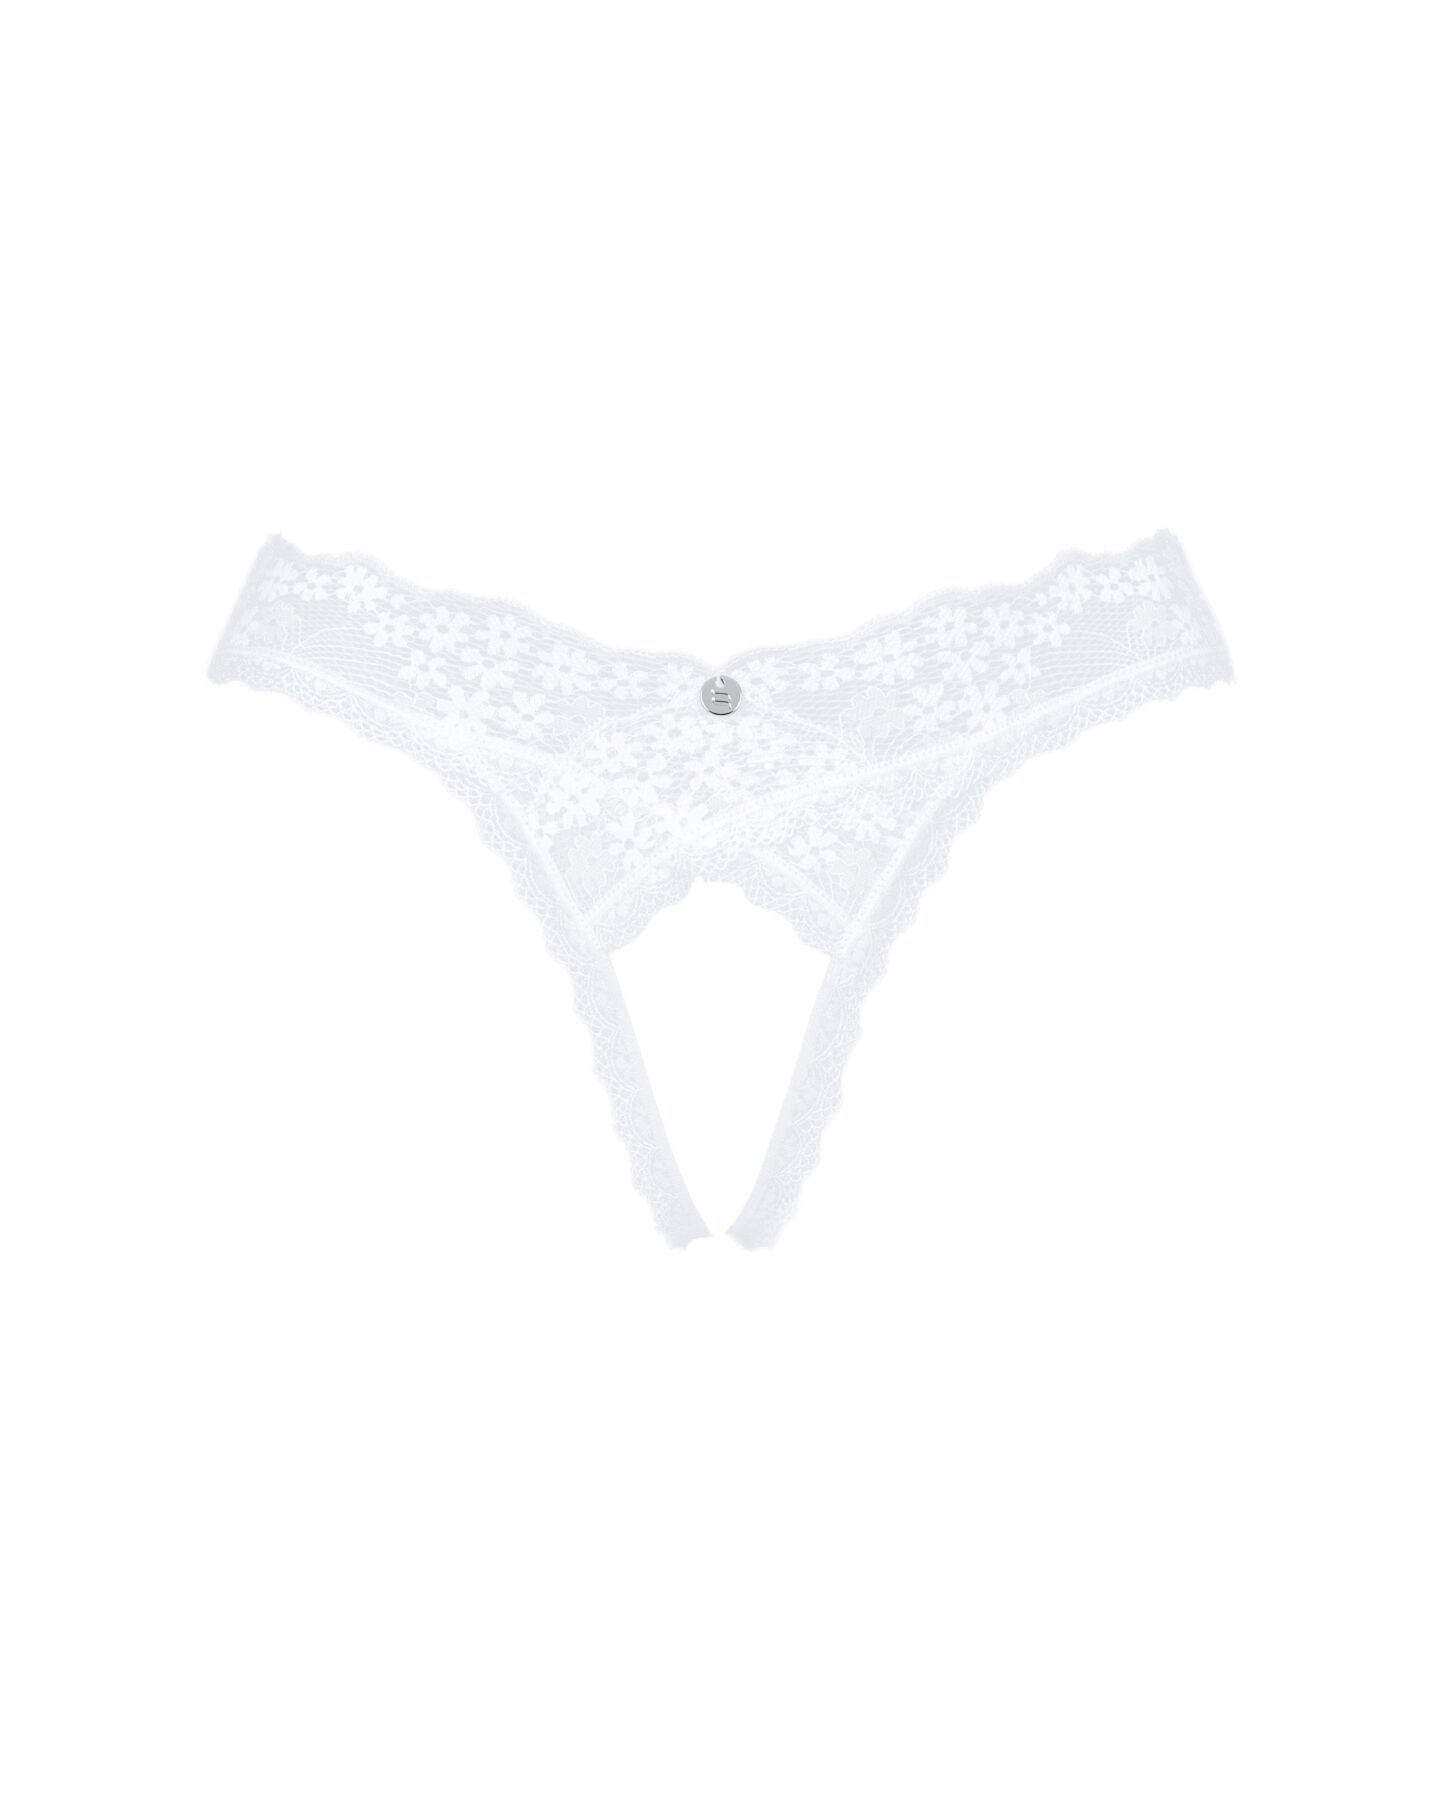   Obsessive Heavenlly crotchless thong,  